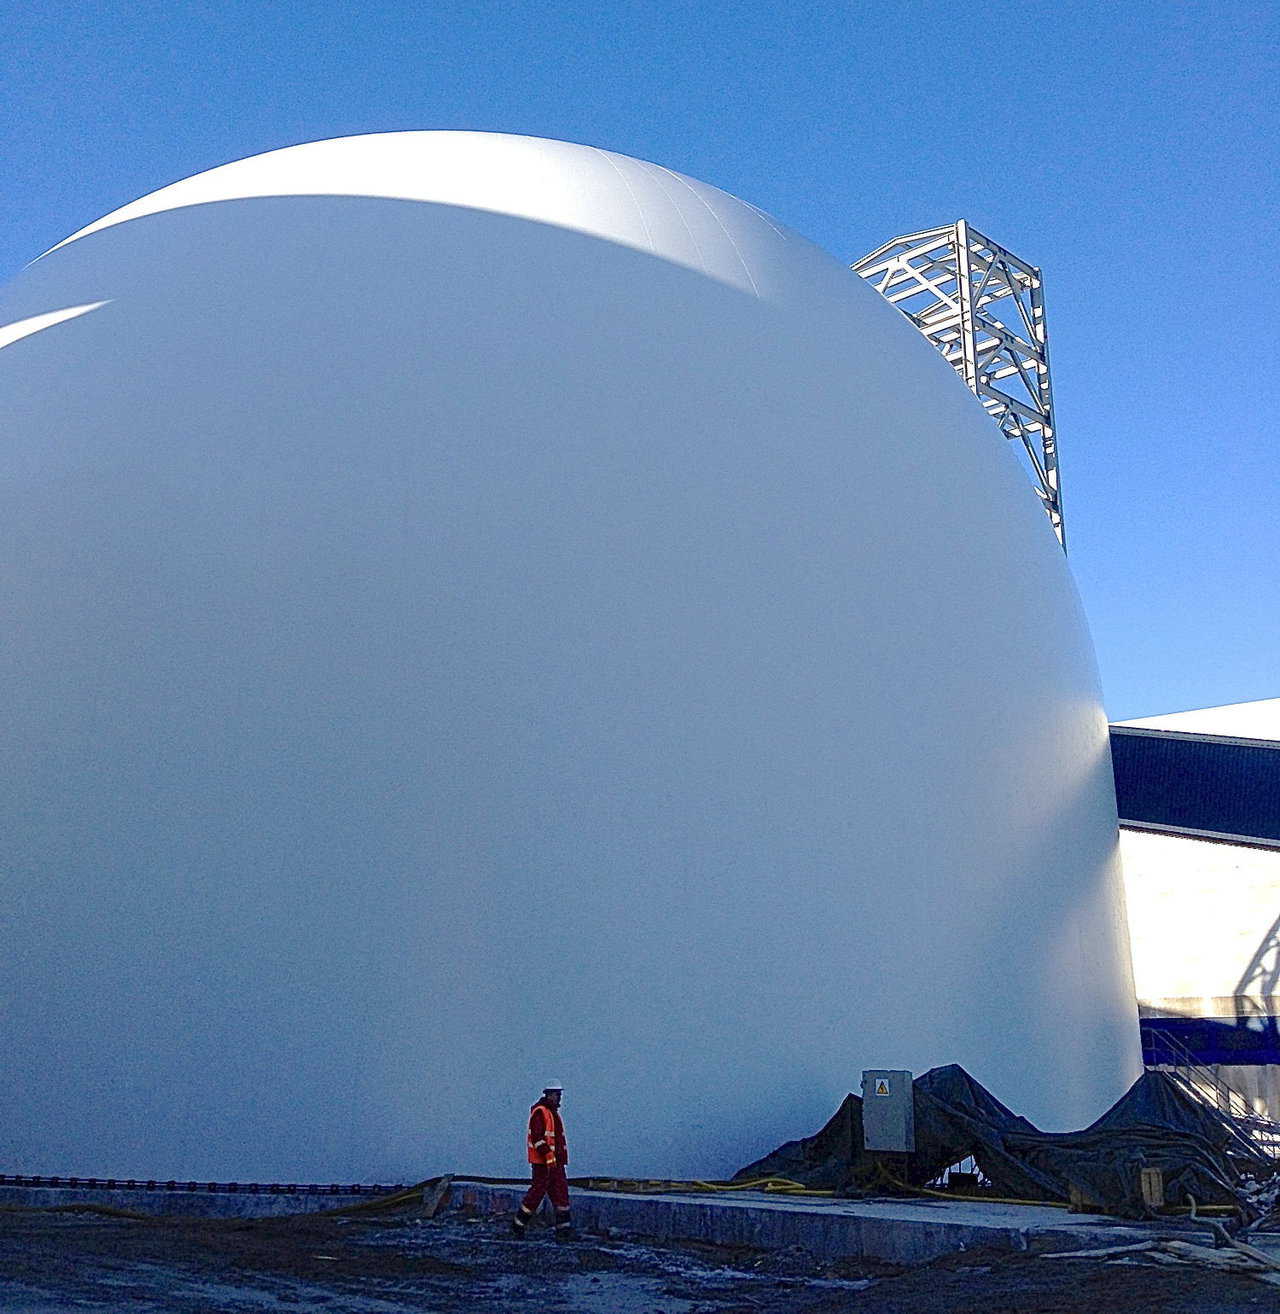 Newly inflated Airform is now ready for construction.